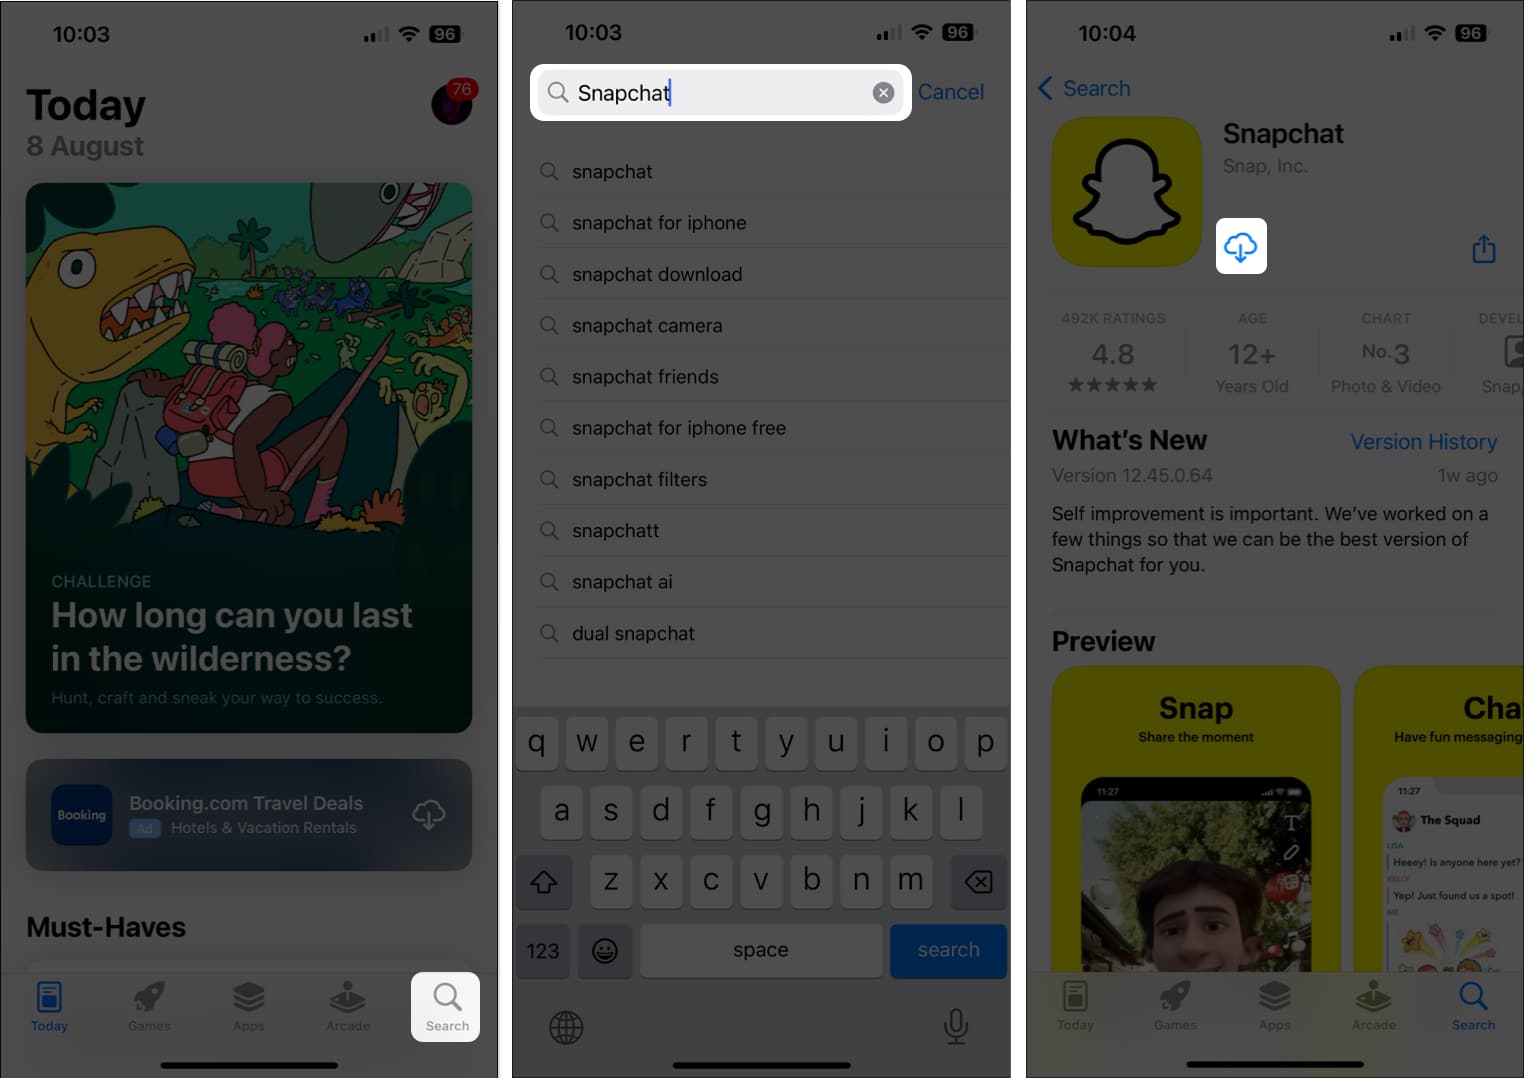 Download Snapchat from app store on iPhone